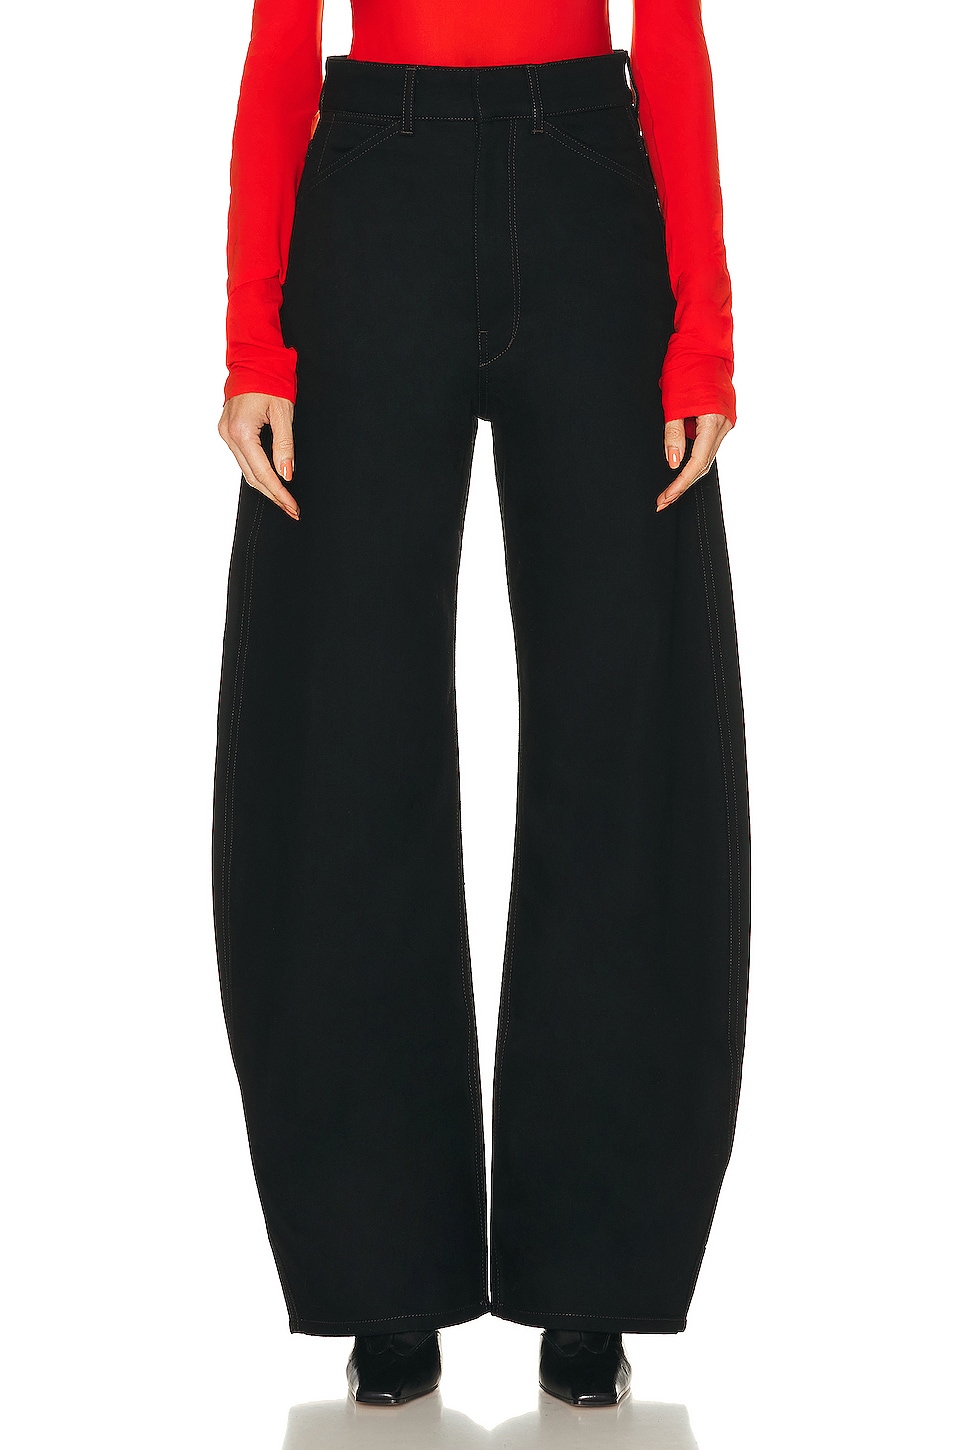 Image 1 of Lemaire High Waisted Curved Pant in Black